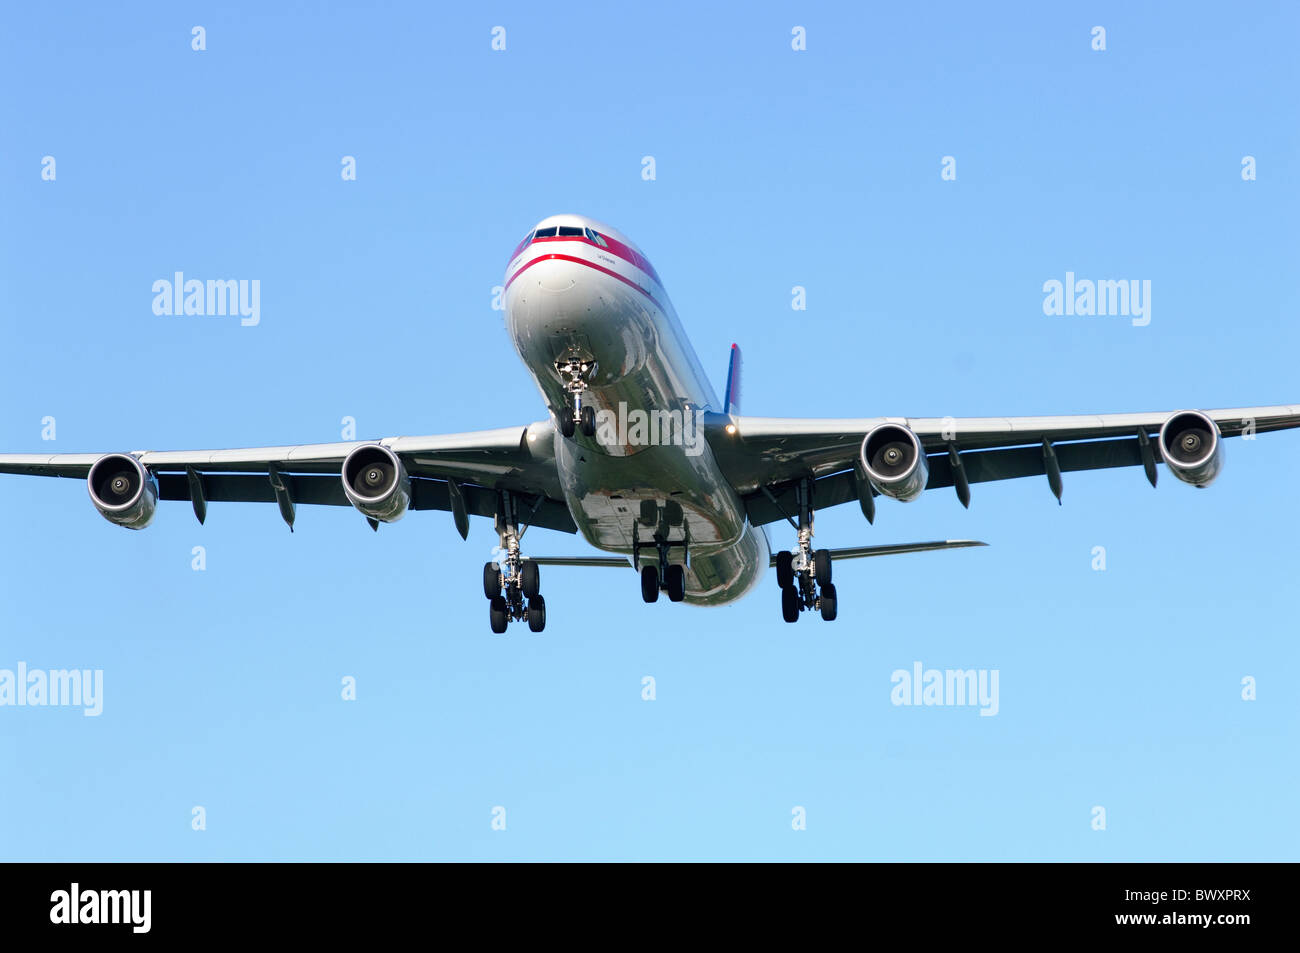 Airbus A340 Air Mauritius on approach for landing at London Heathrow Airport Stock Photo